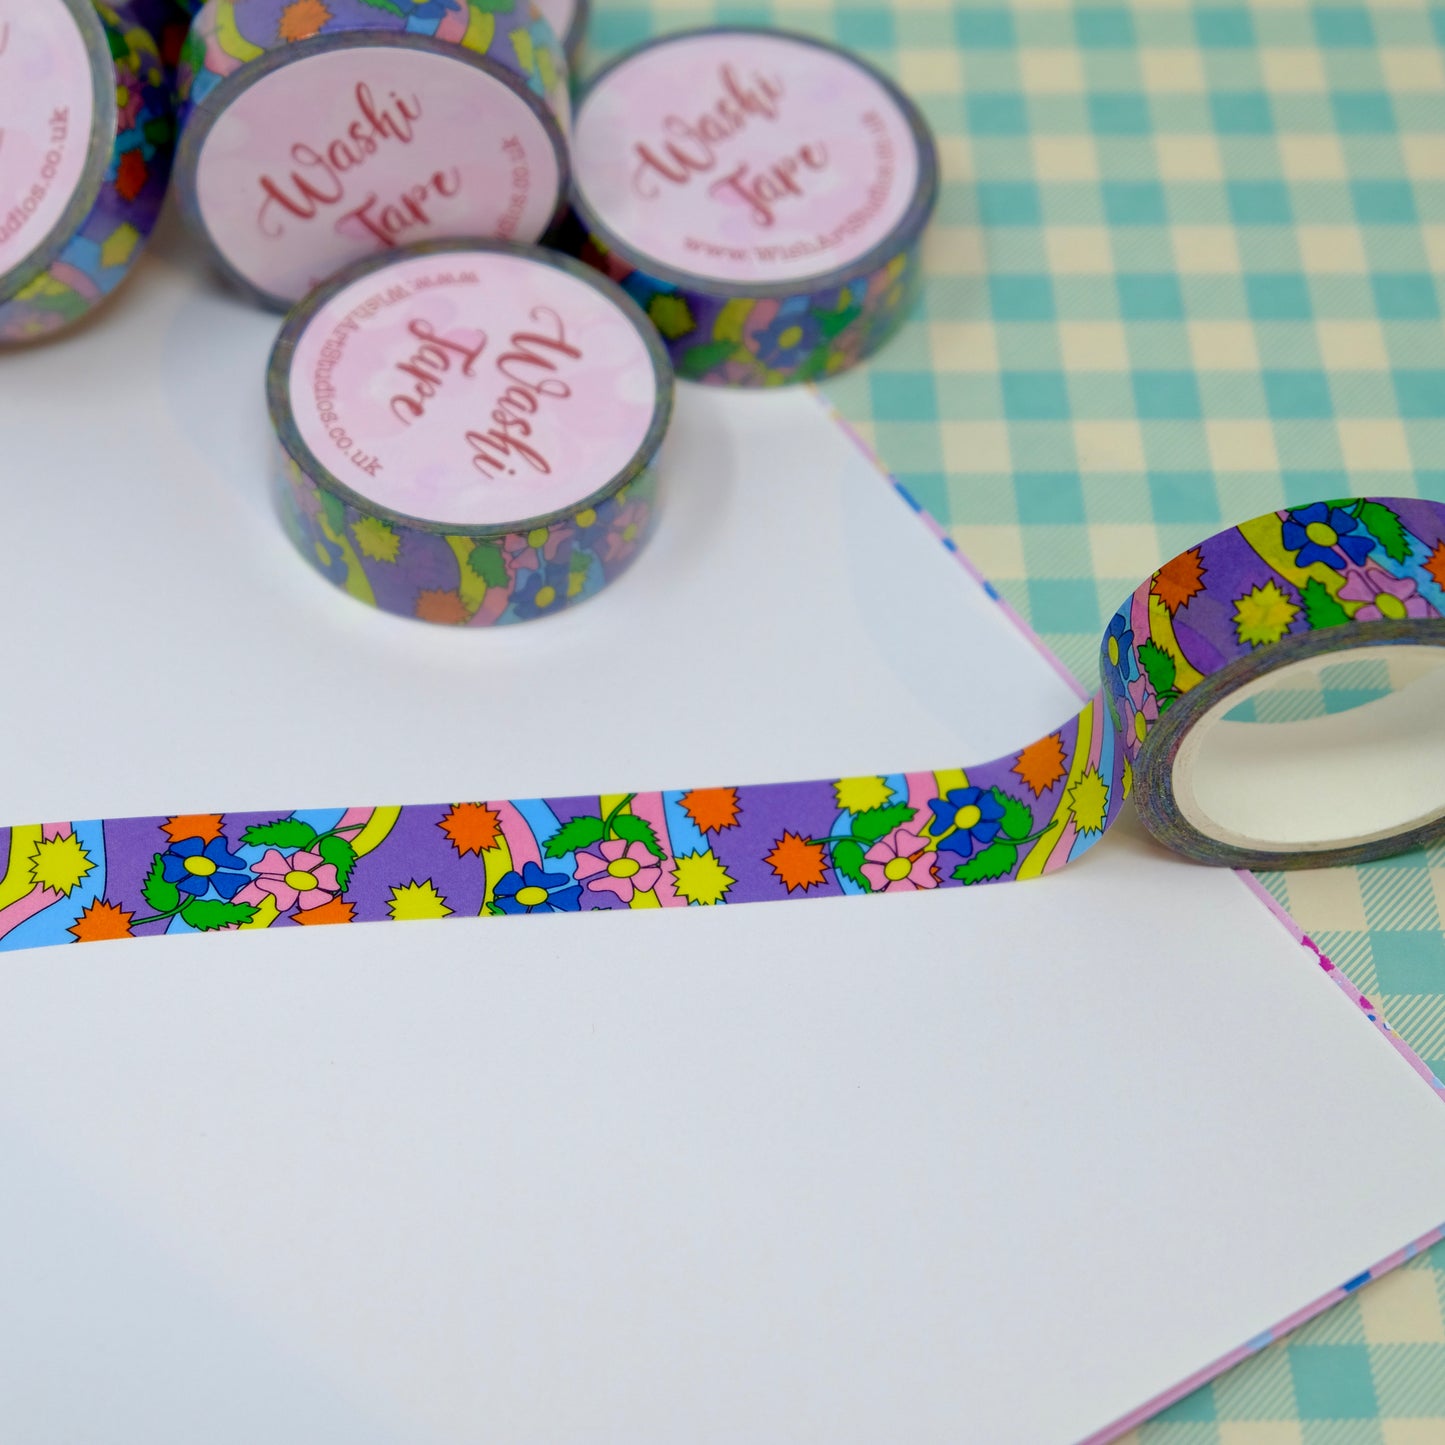 Purple Washi Tape With Stars and Flowers - Illustrated Washi Paper Tape - Bright And Colourful Stationary Tape for Bullet Journalling